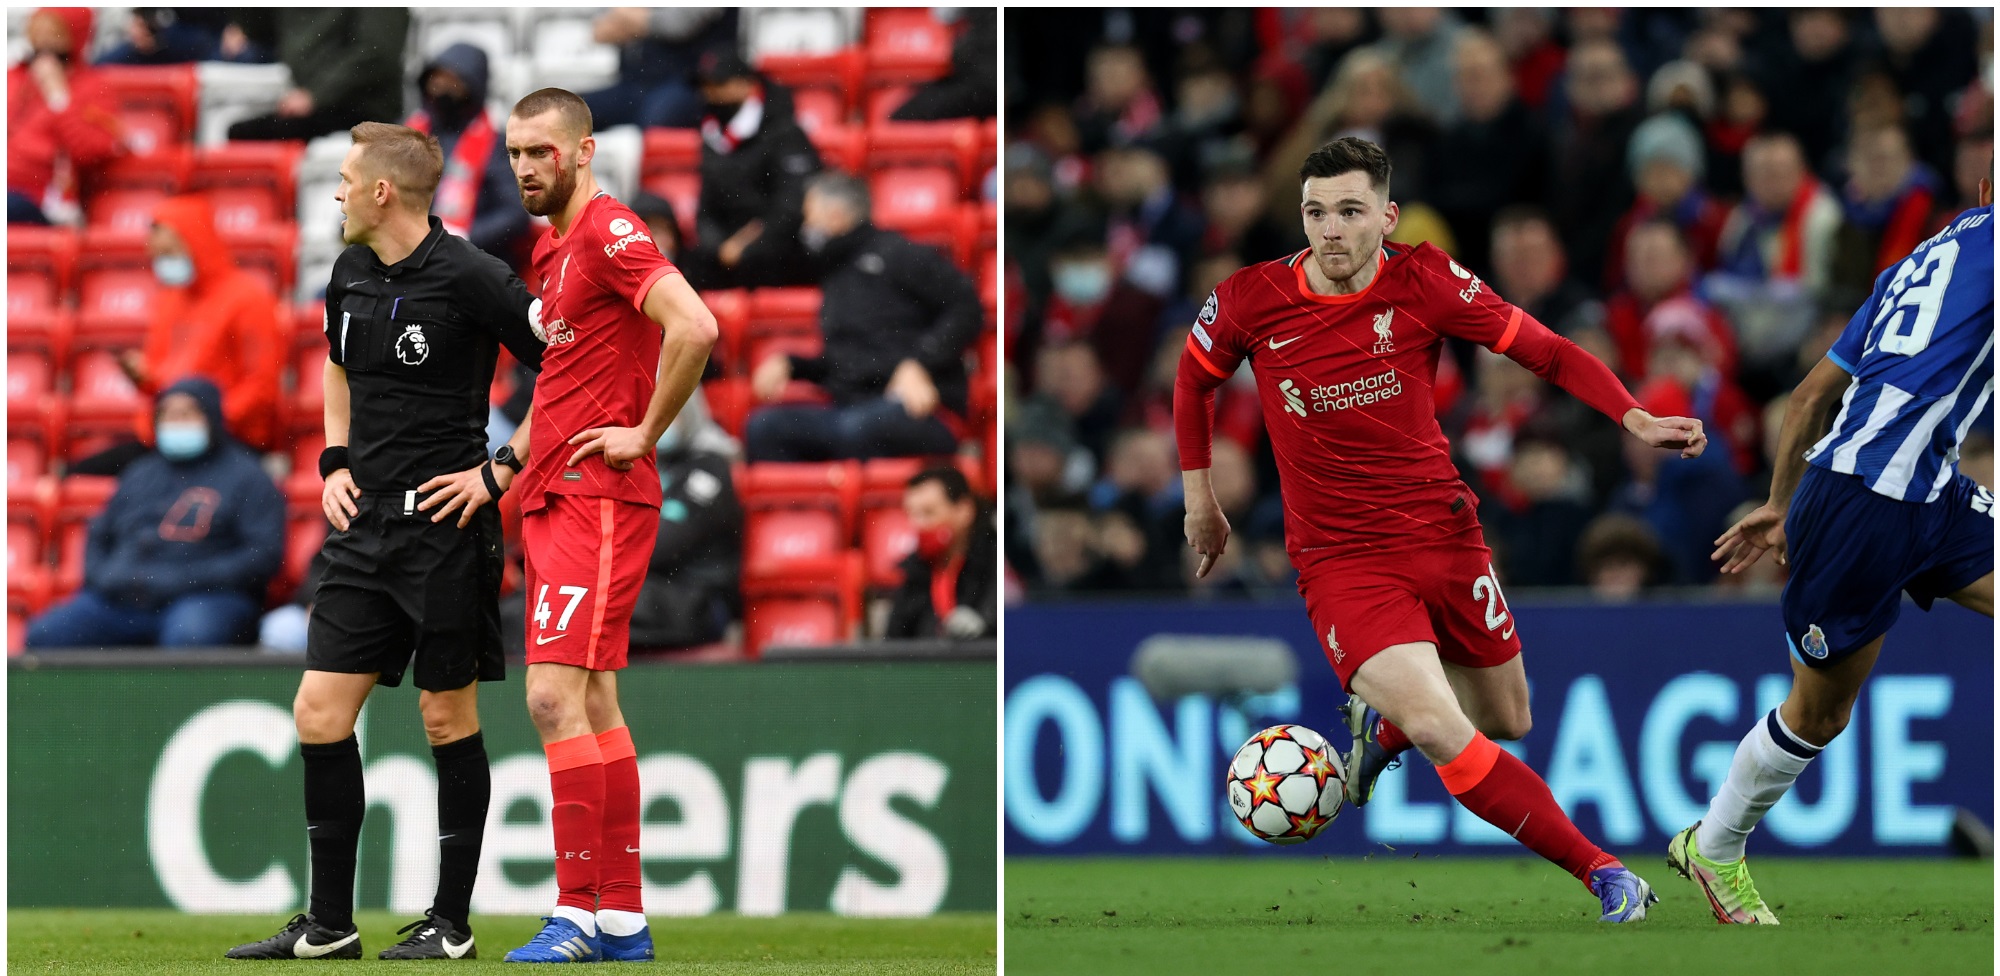 ‘Get off Insta’ – Nat Phillips’ hilarious interaction with Andy Robertson on social media